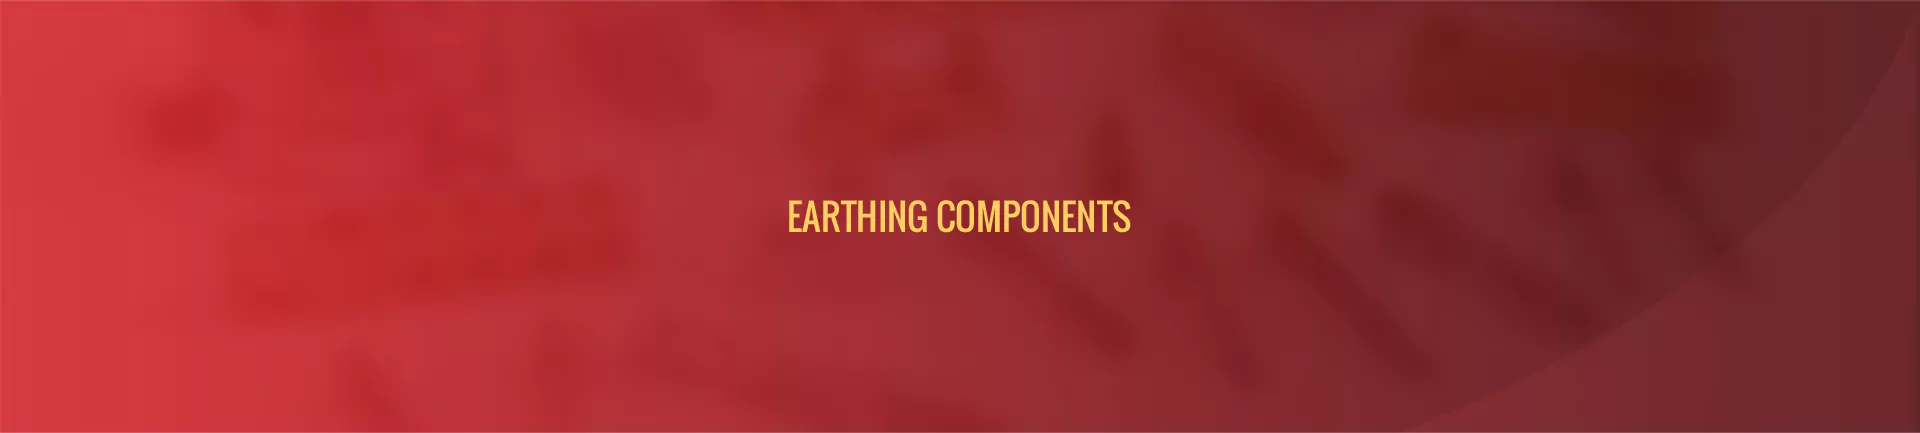 earthing-components-banner